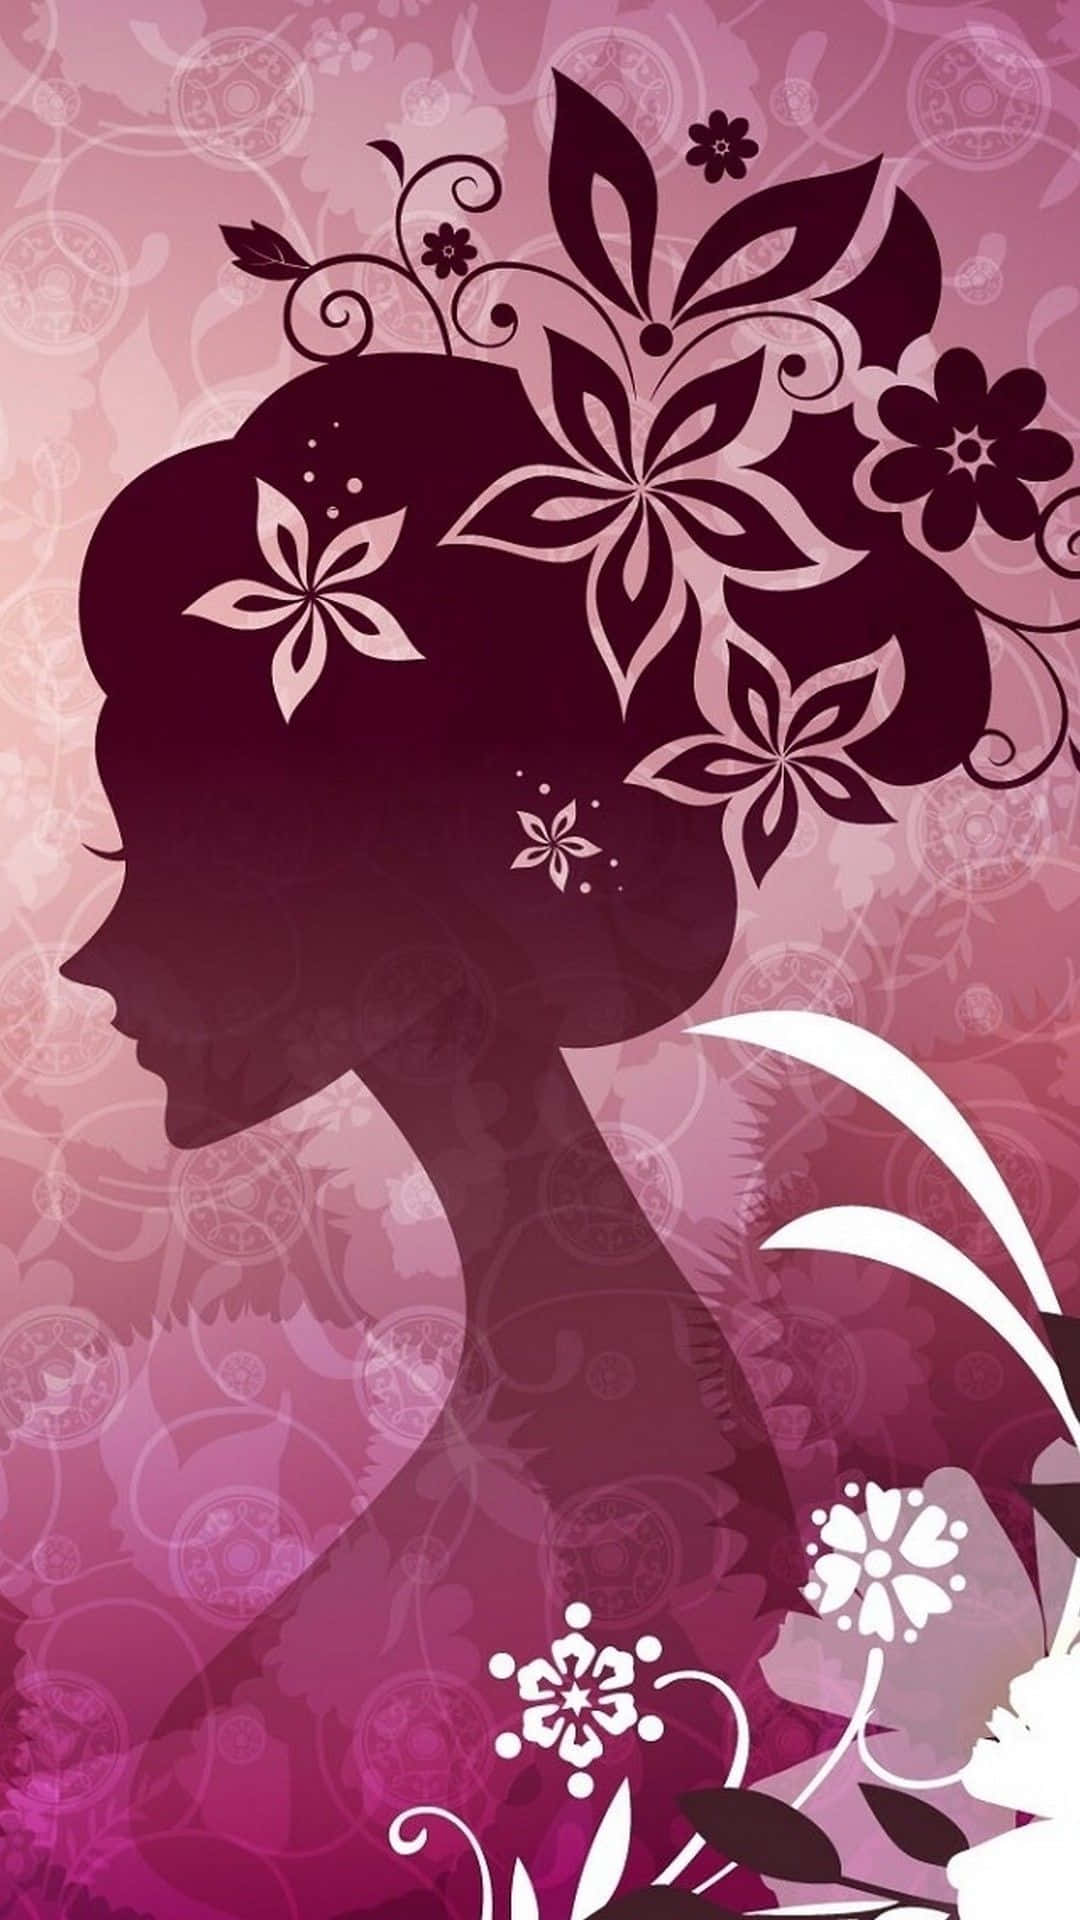 Floral Girl Silhouette Girly Cute Picture